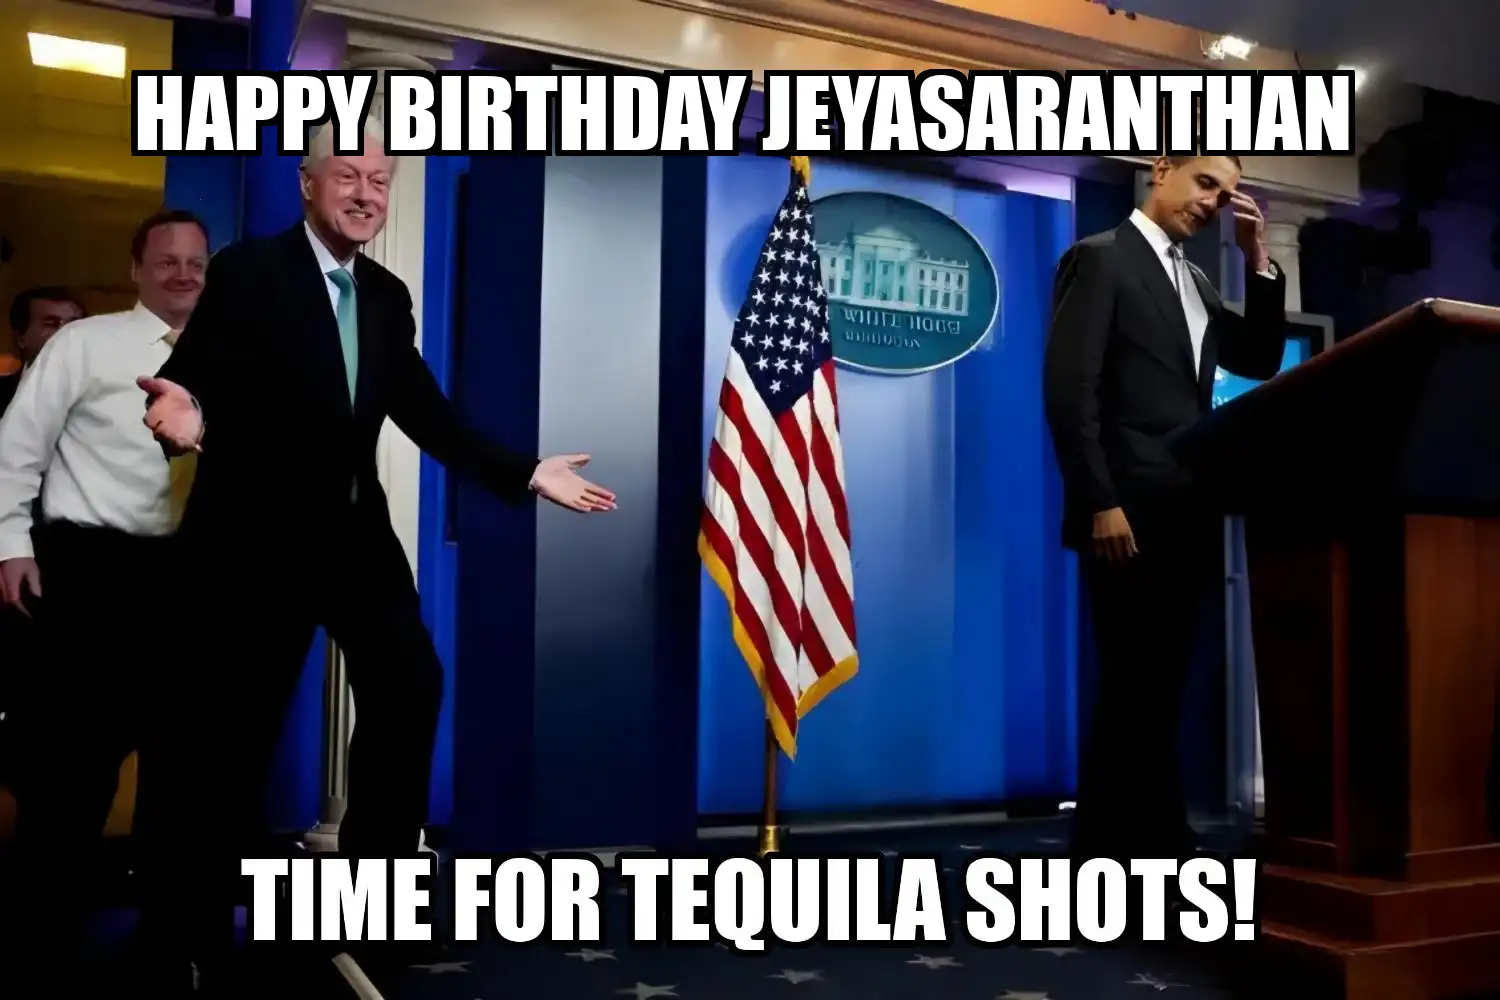 Happy Birthday Jeyasaranthan Time For Tequila Shots Memes